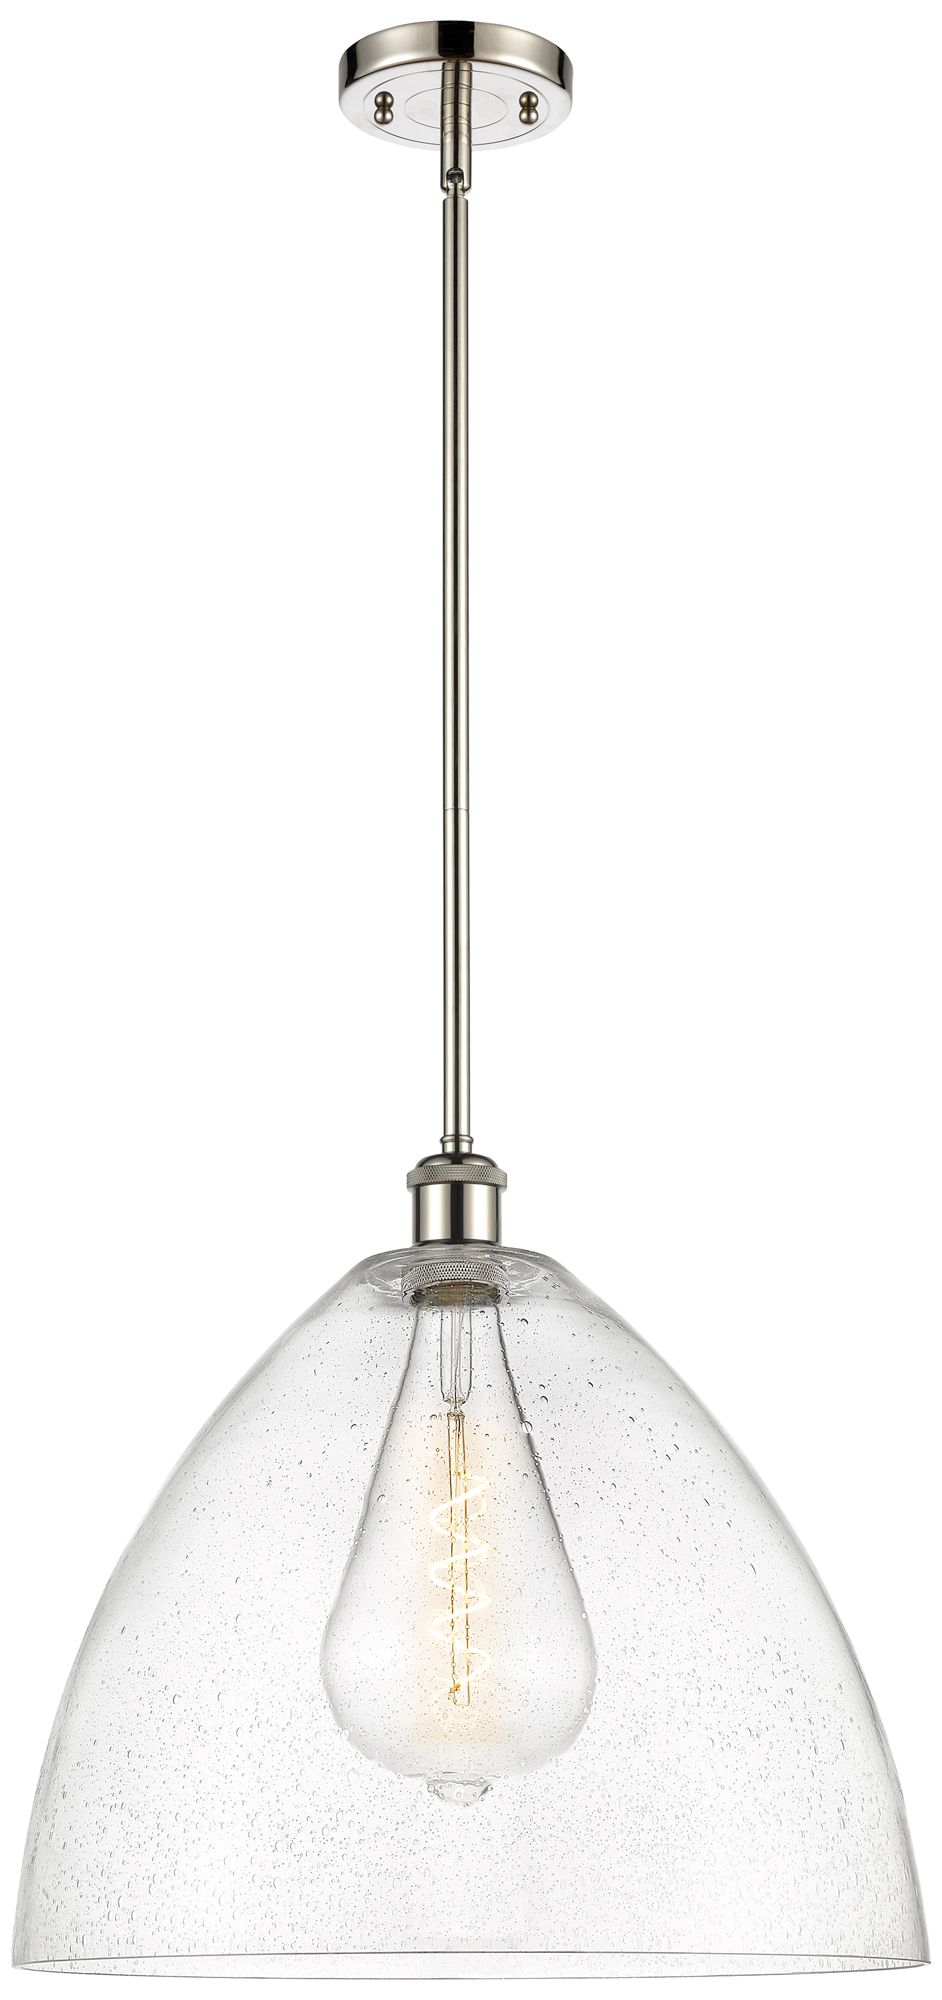 Bristol Glass 16" Polished Nickel Pendant With Seedy Shade